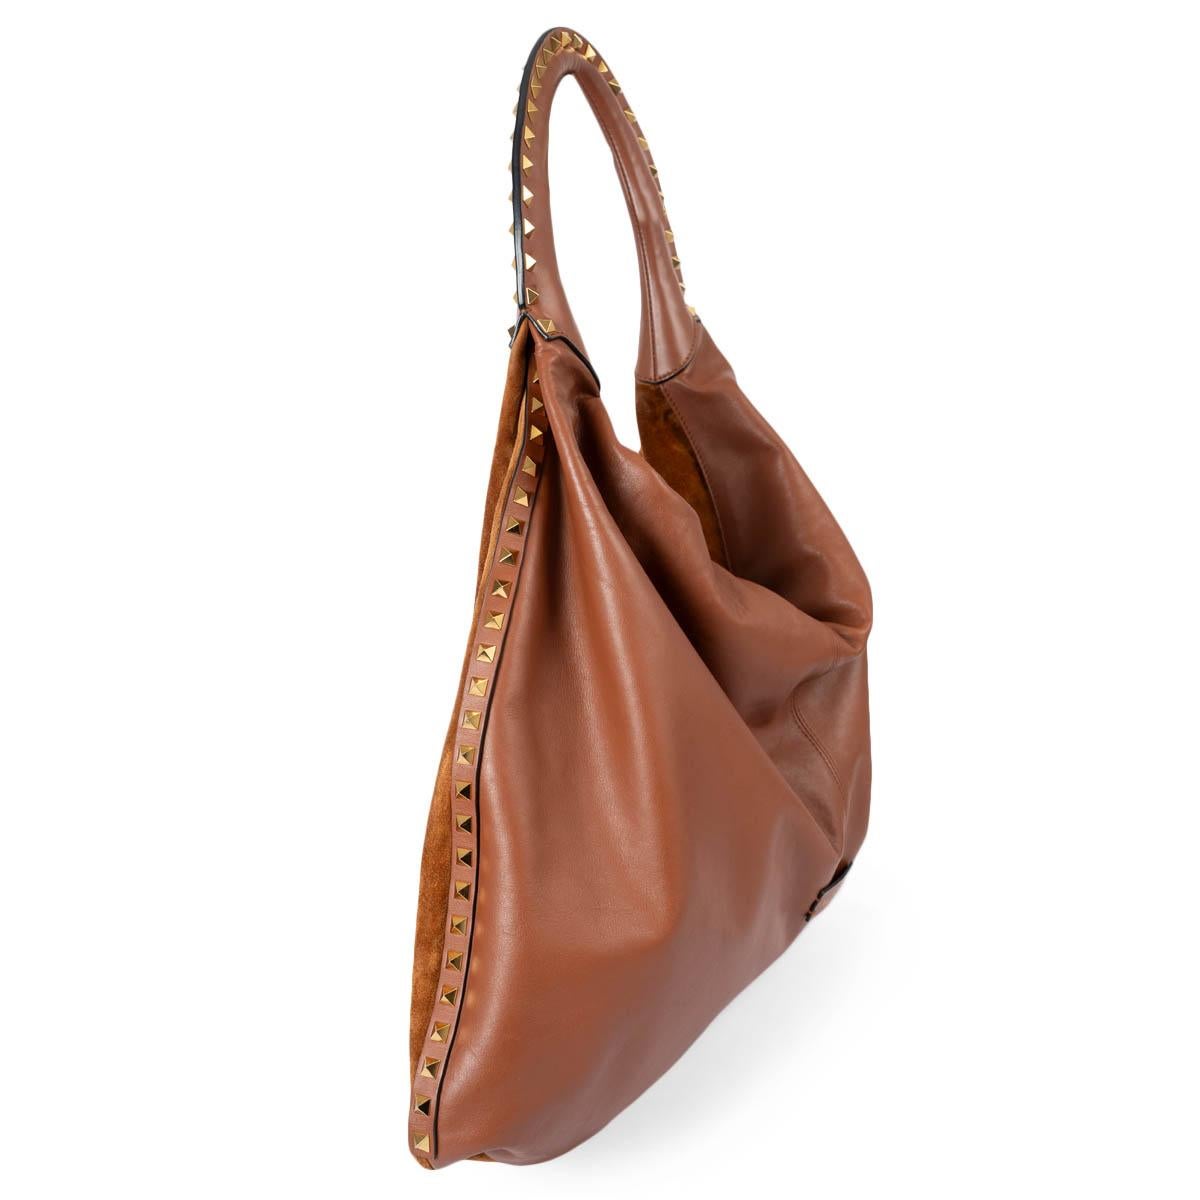 100% authentic Valentino Rockstud hobo in cognac brown suede and leather. Features gold-tone pyramid studs along the handle and gusset and logo patch on the front. Opens with a magnet on top and is lined in black leather with detachable red zipper